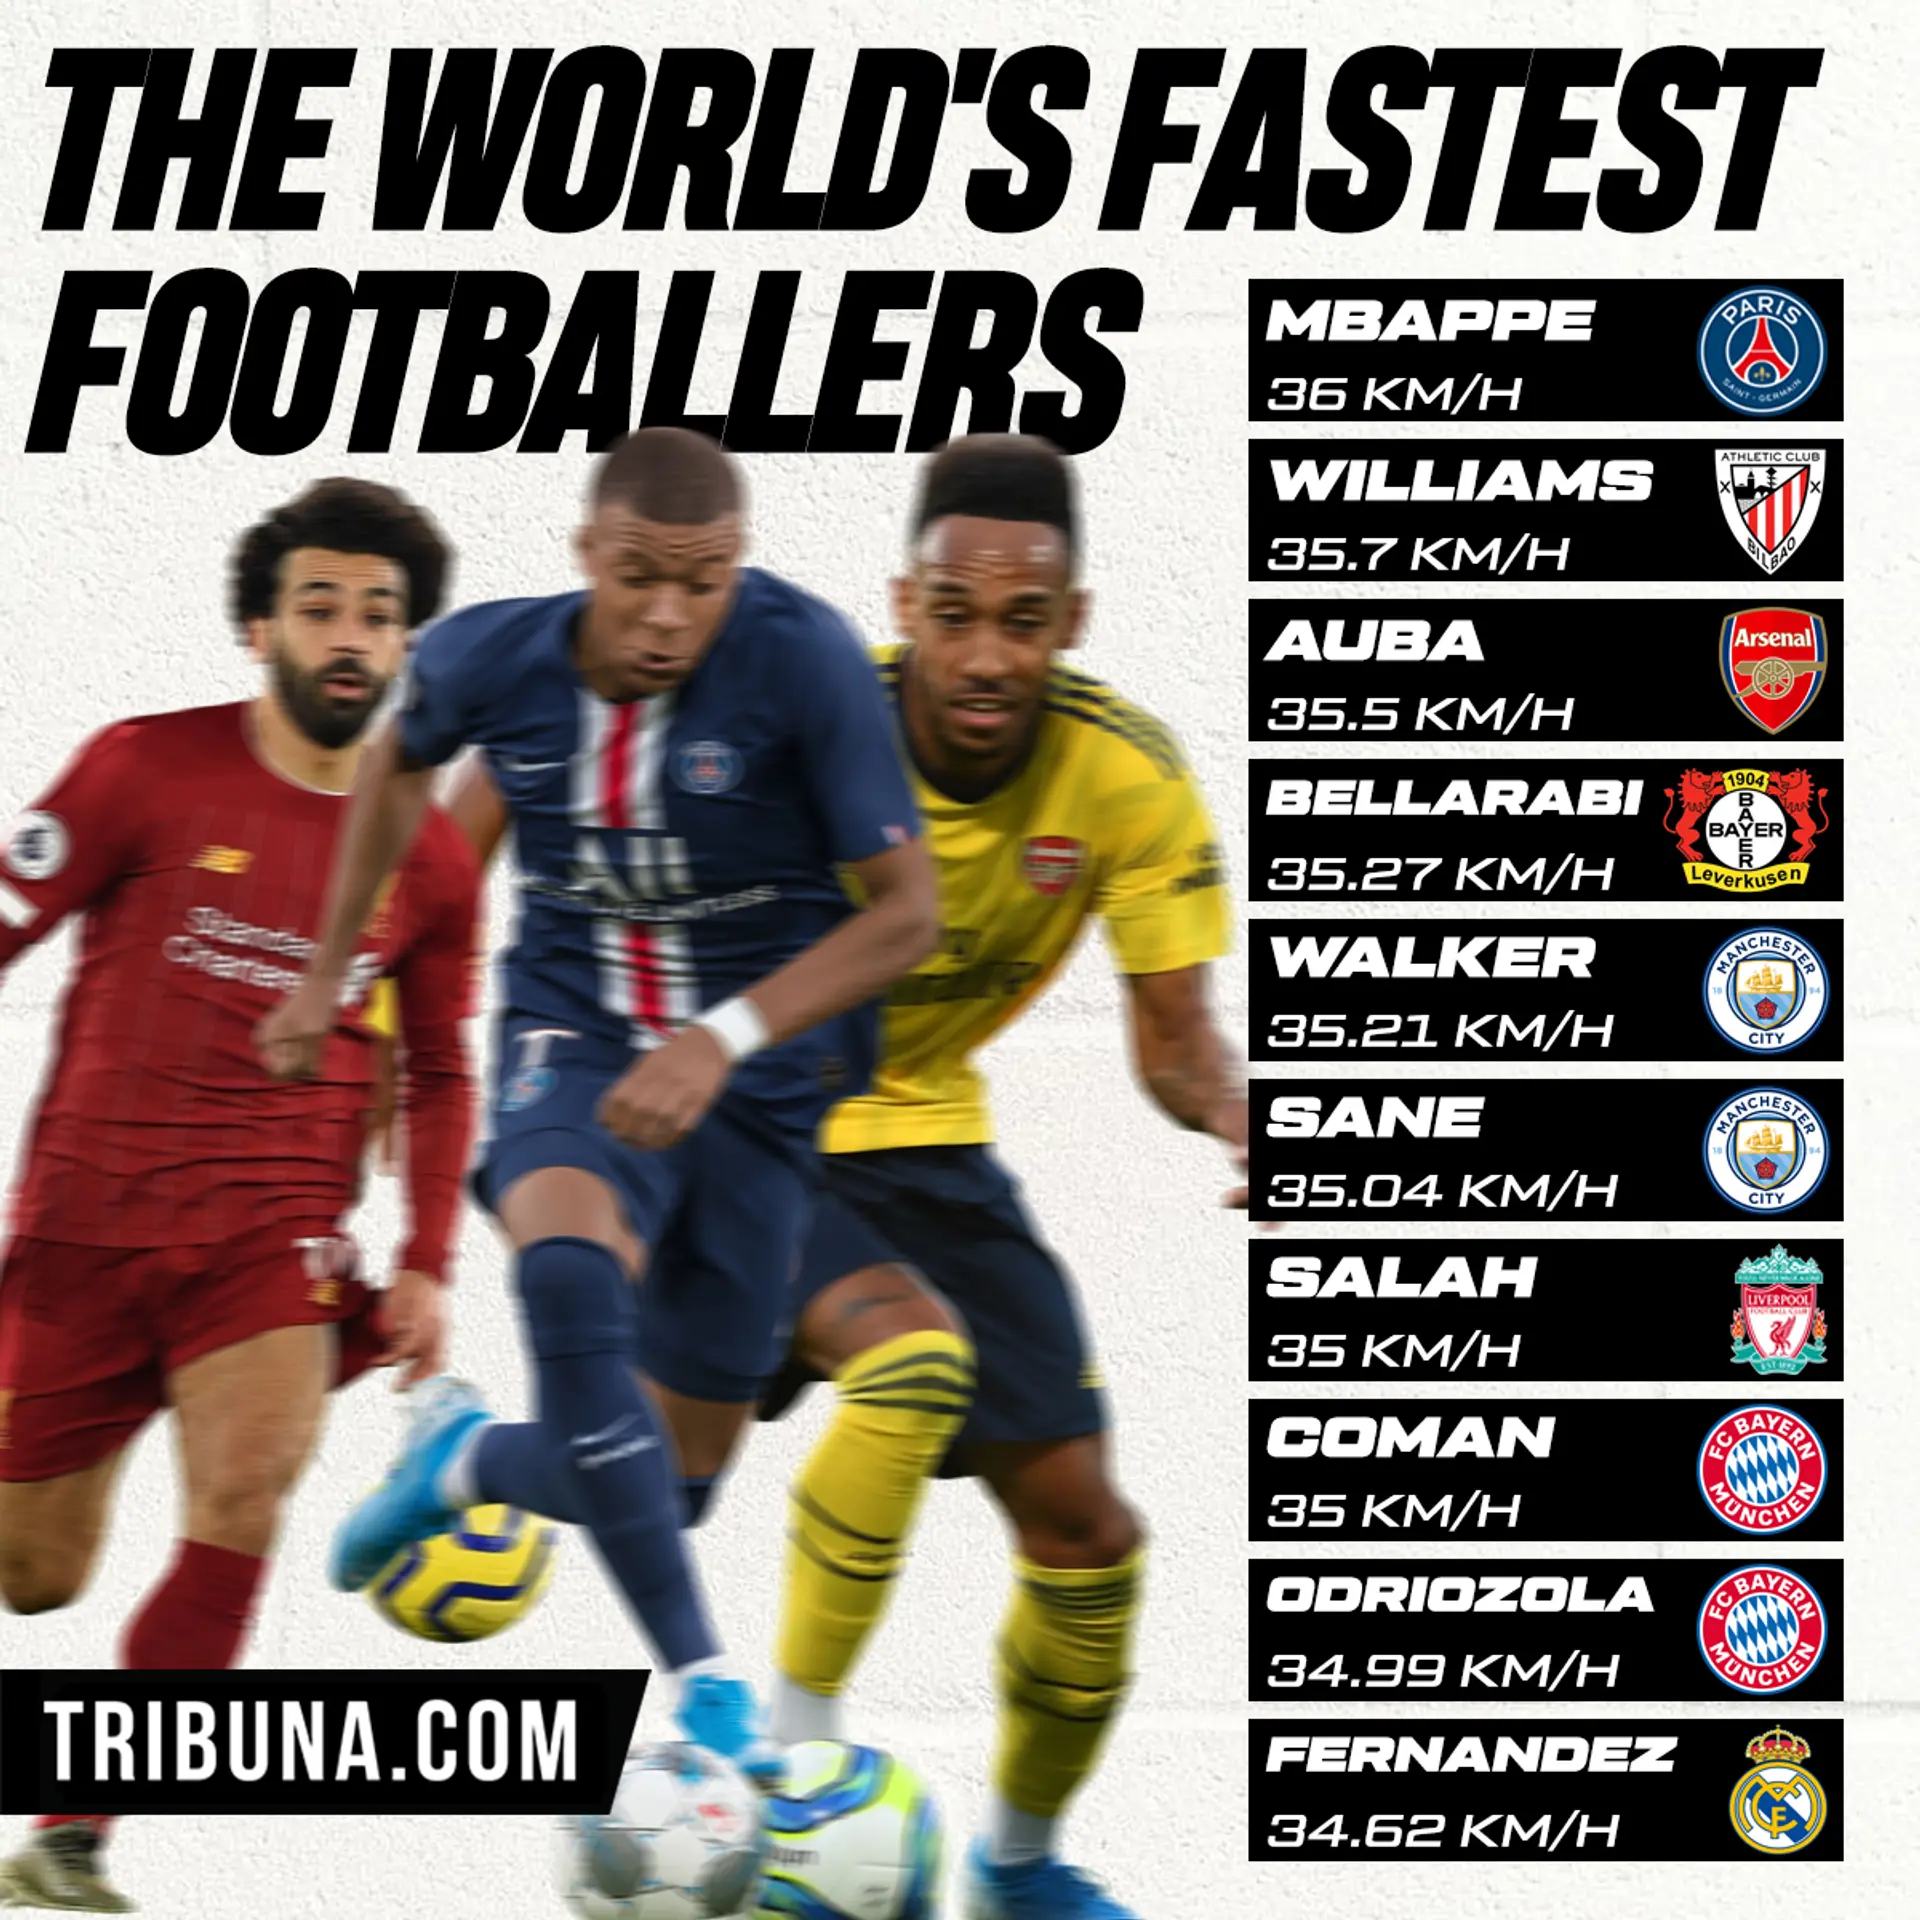 2 Madrid players, 2 rumoured targets on the list of fastest football players...